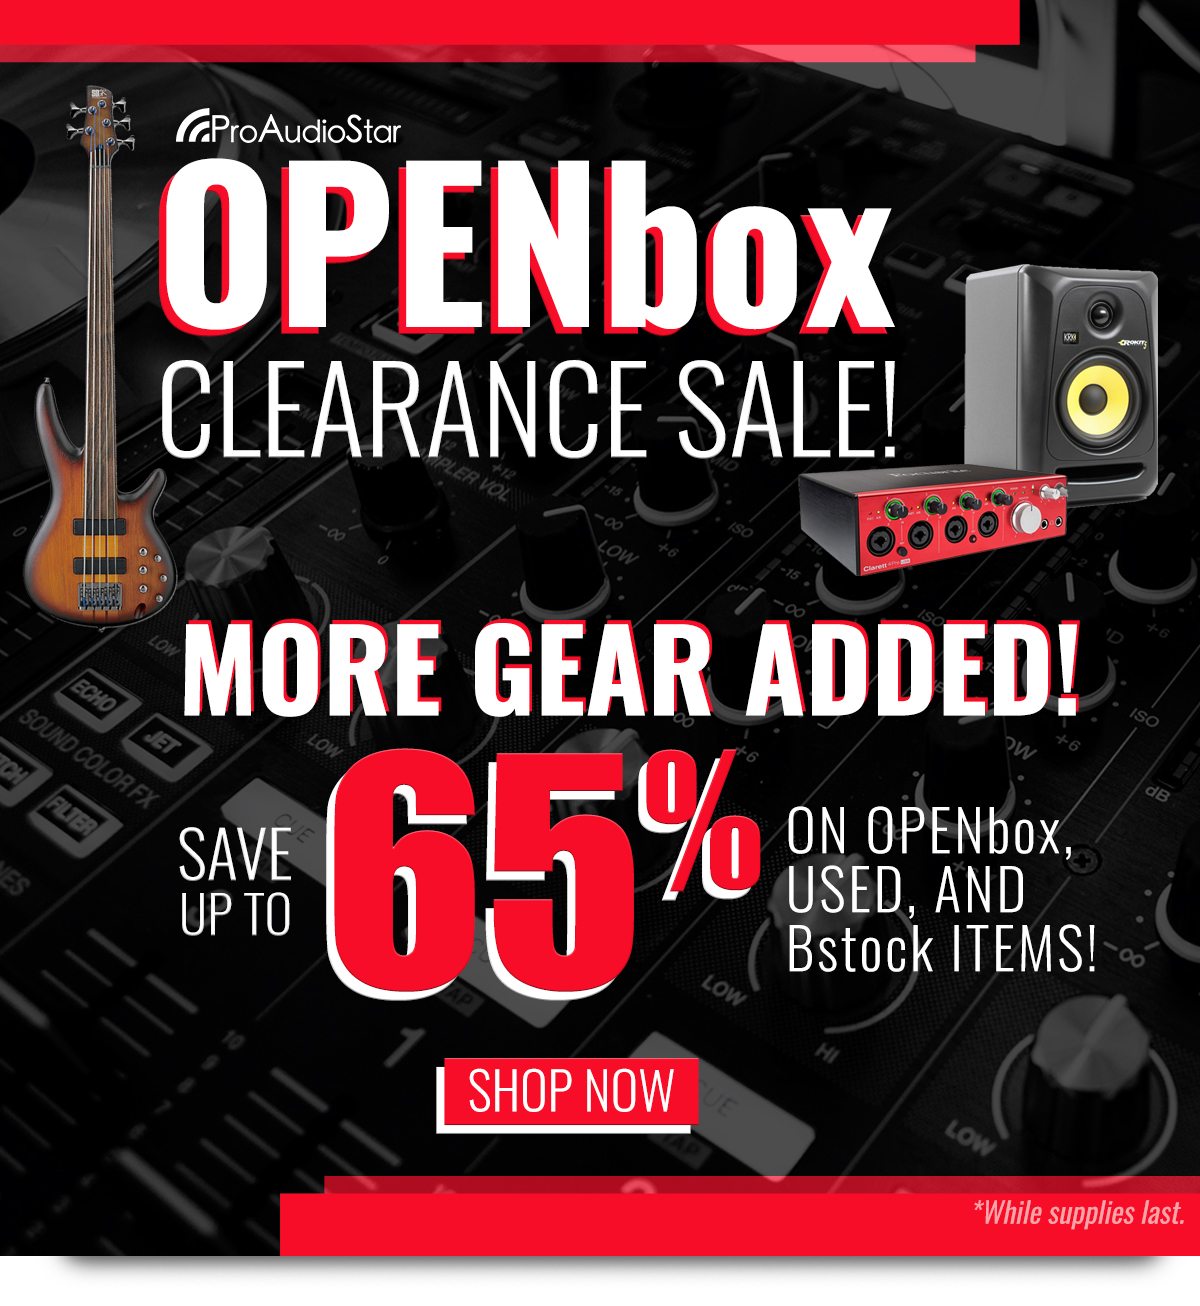 Save Up To 65% Storewide on these Open Box Deals